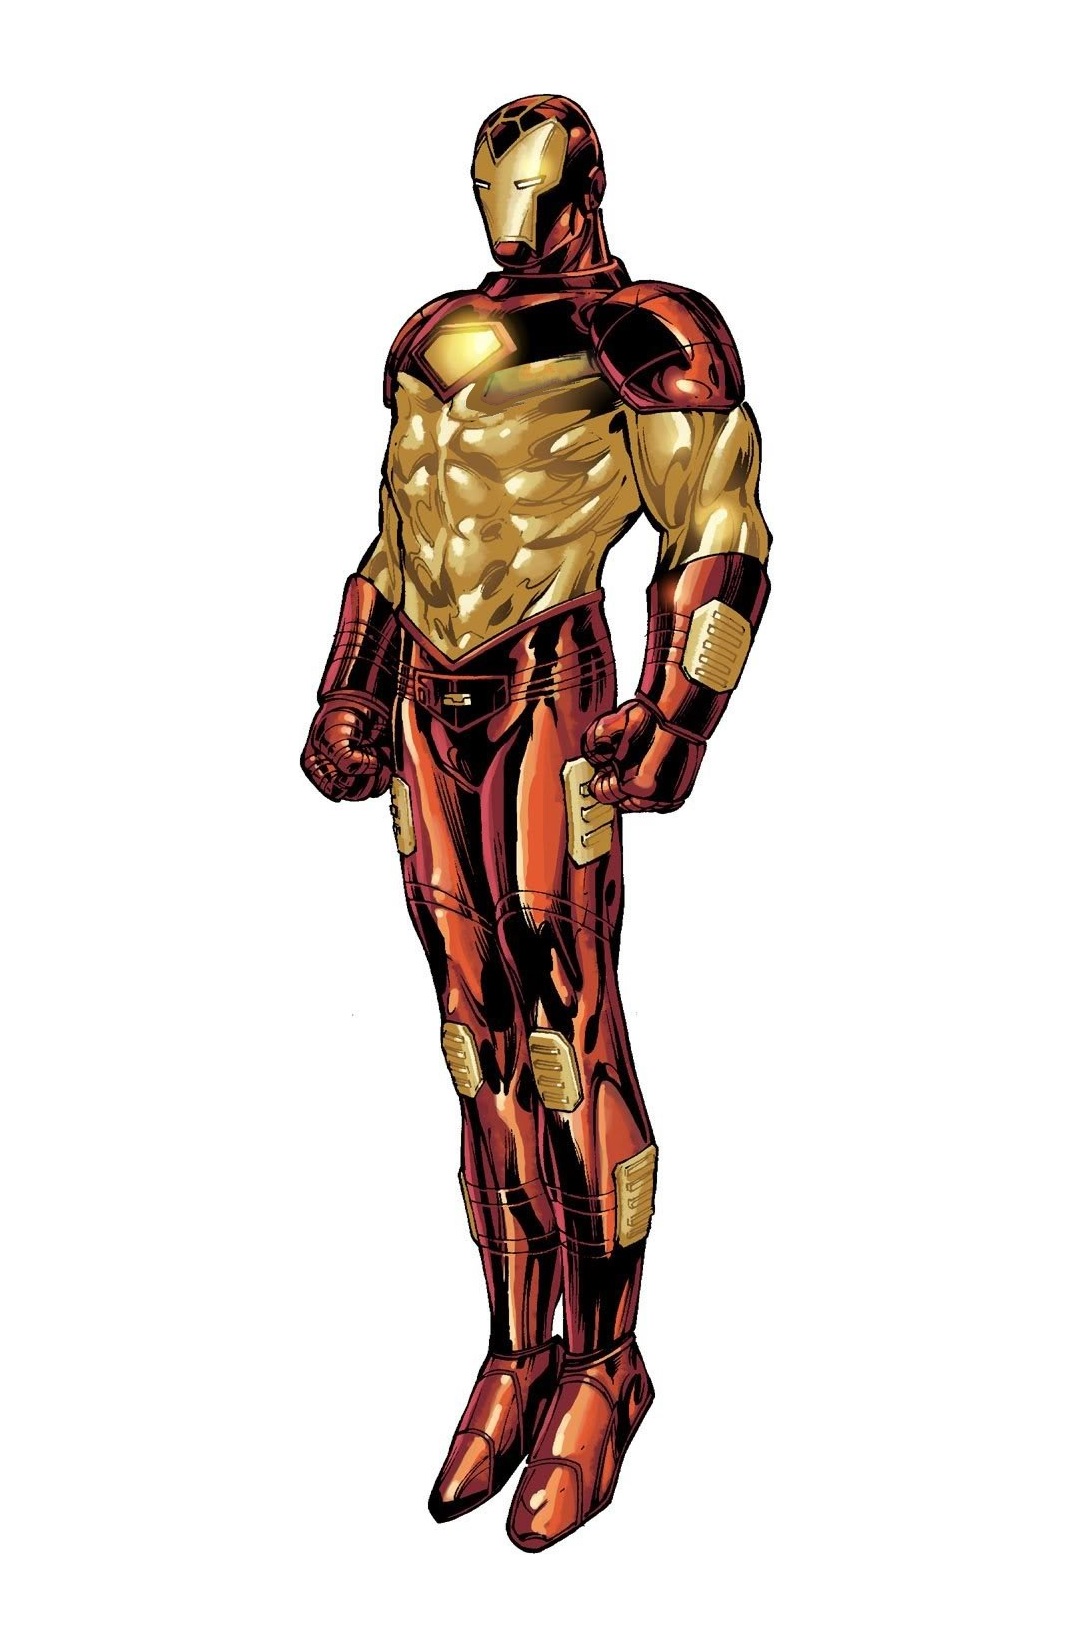 Image - Iron Man Armor Model 13 (Retouched).jpg | Superpower Wiki